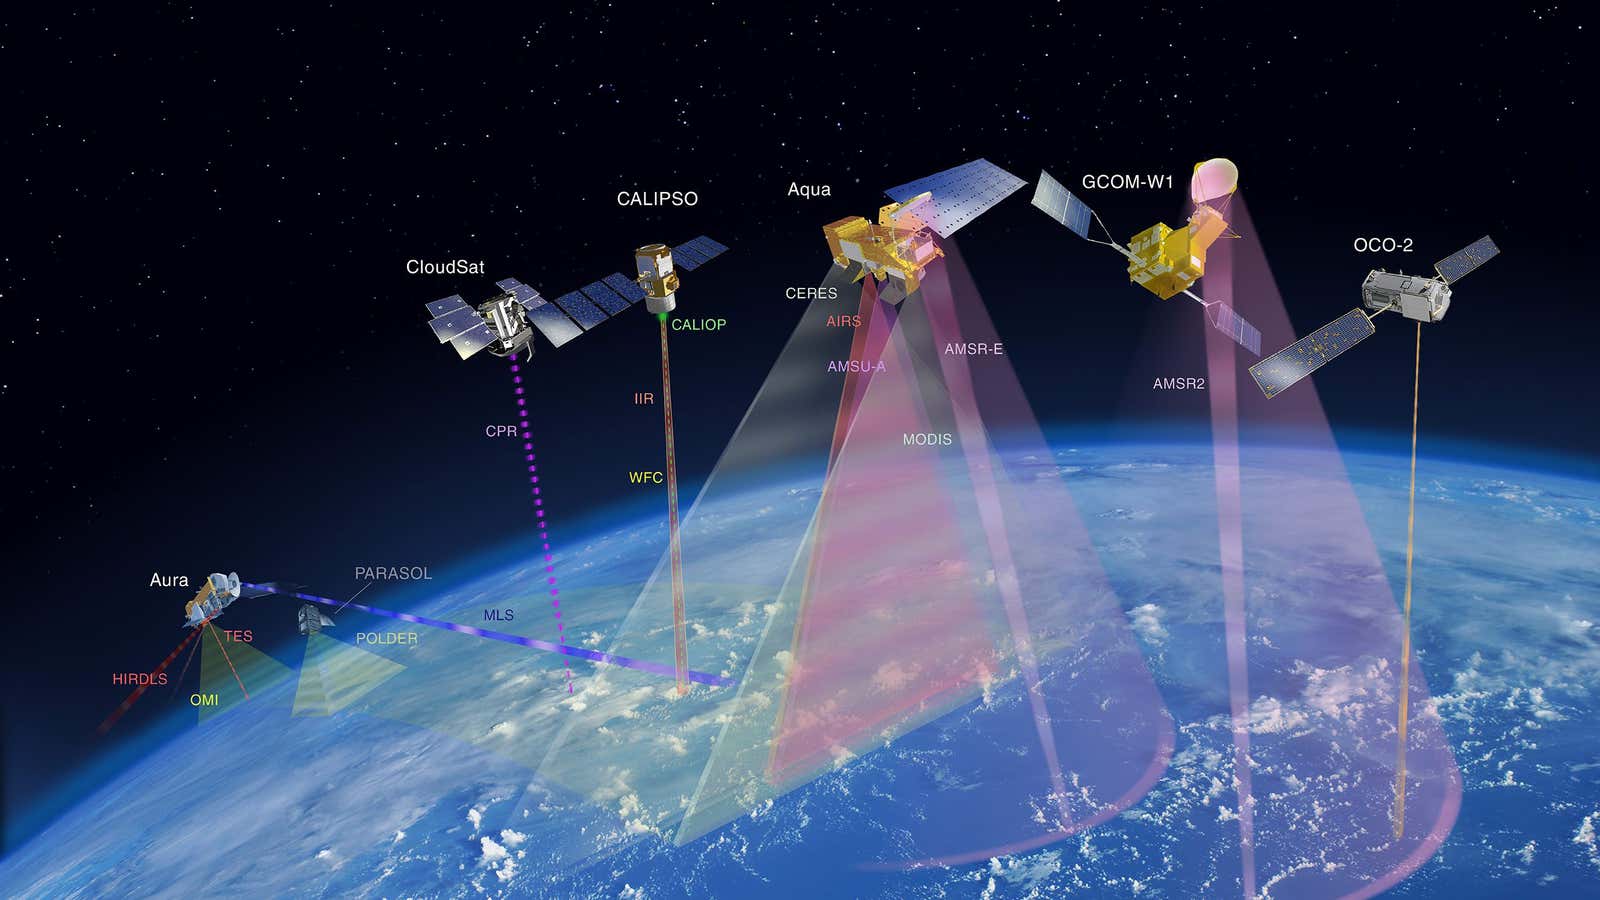 NASA has more than a dozen Earth-observing satellites in space right now. You can’t just stop flying them.